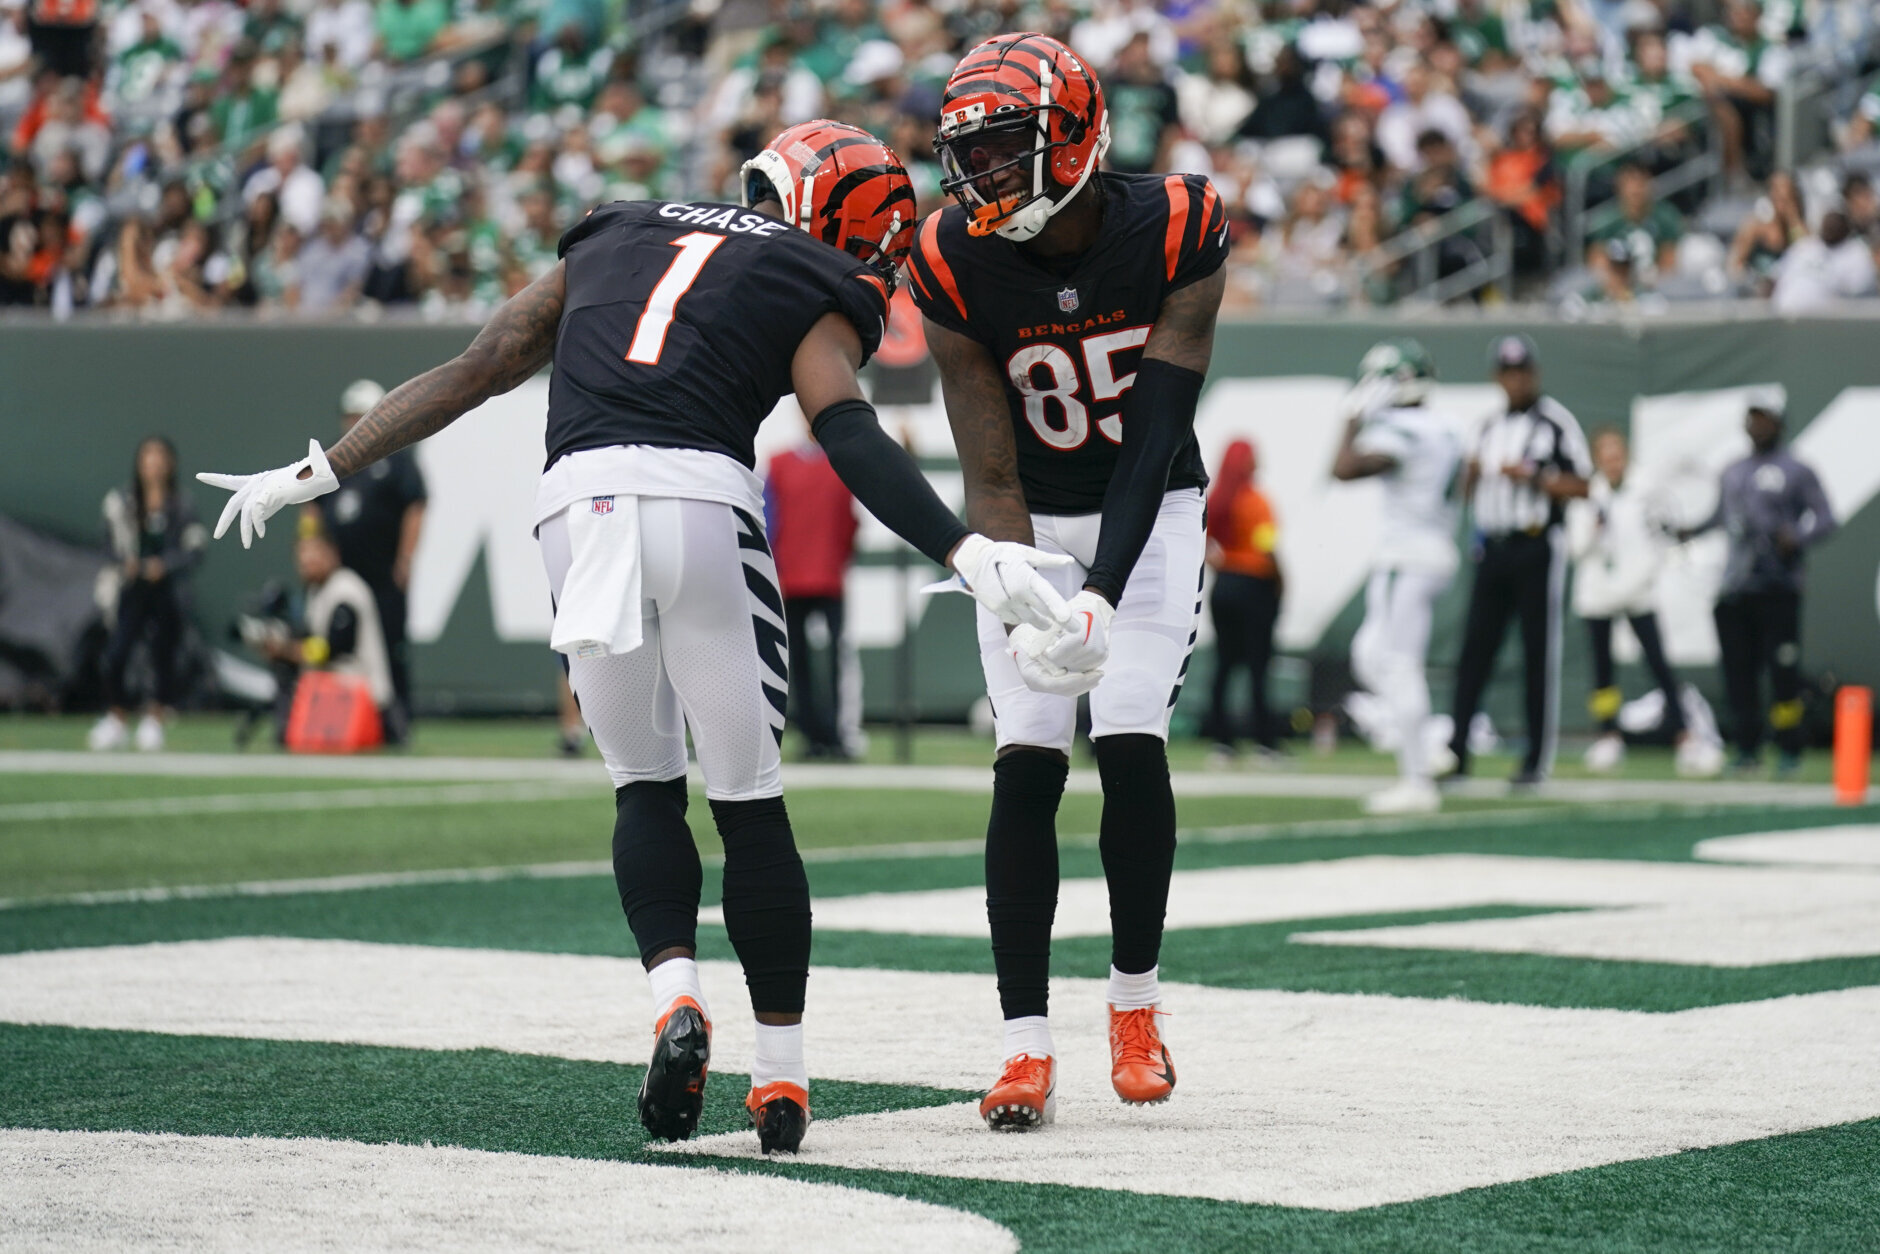 <p><em><strong>Bengals 27</strong></em><br />
<em><strong>Jets 12</strong></em></p>
<p>The Cincinnati Bengals are making fantasy football owners happy and the Jets are disappointing New York. All is right with the world again.</p>
